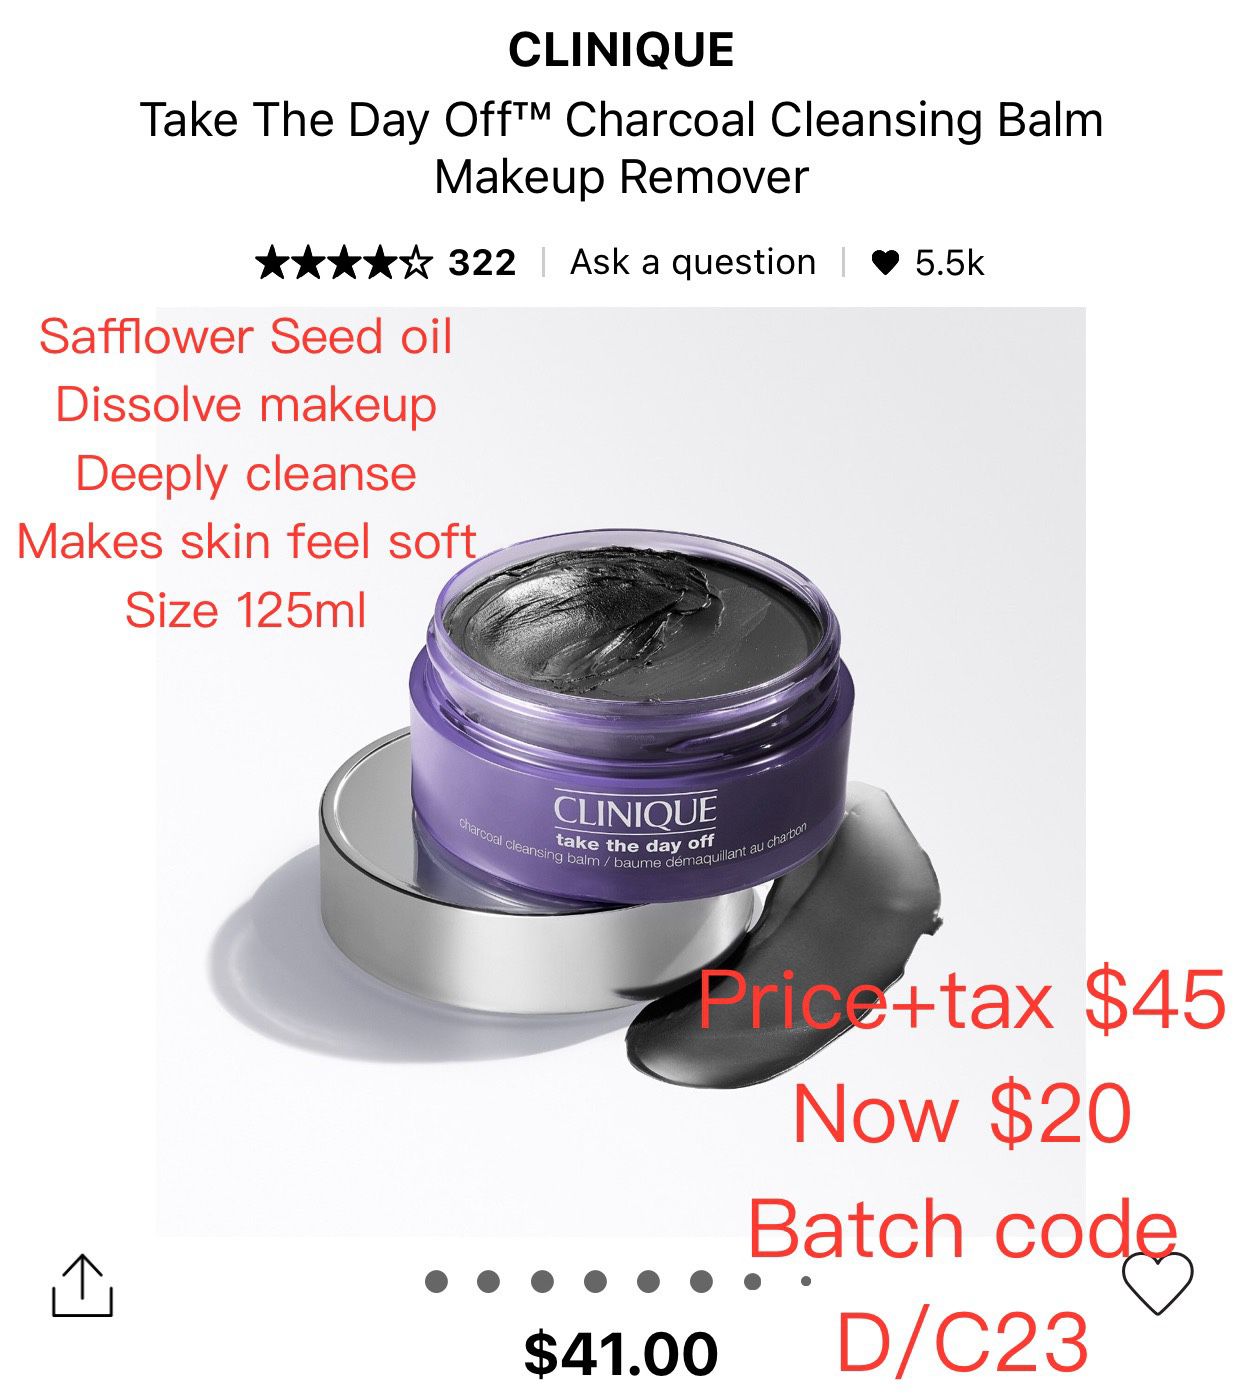 Clinique Charcoal Cleansing Balm